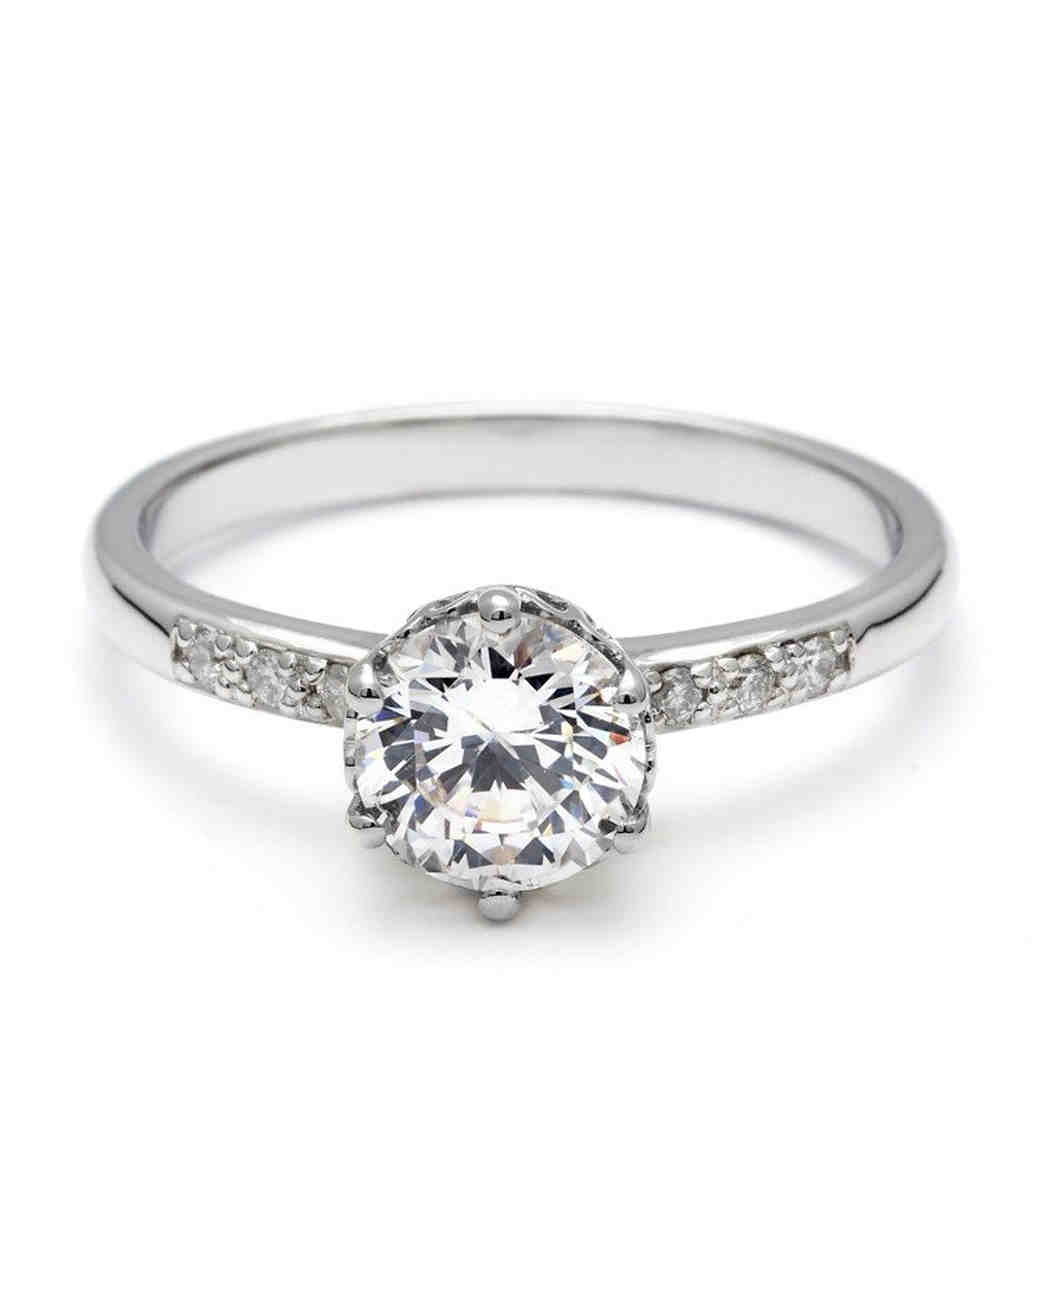 white gold engagement rings anna sheffield white gold engagement ring KRZPDKK